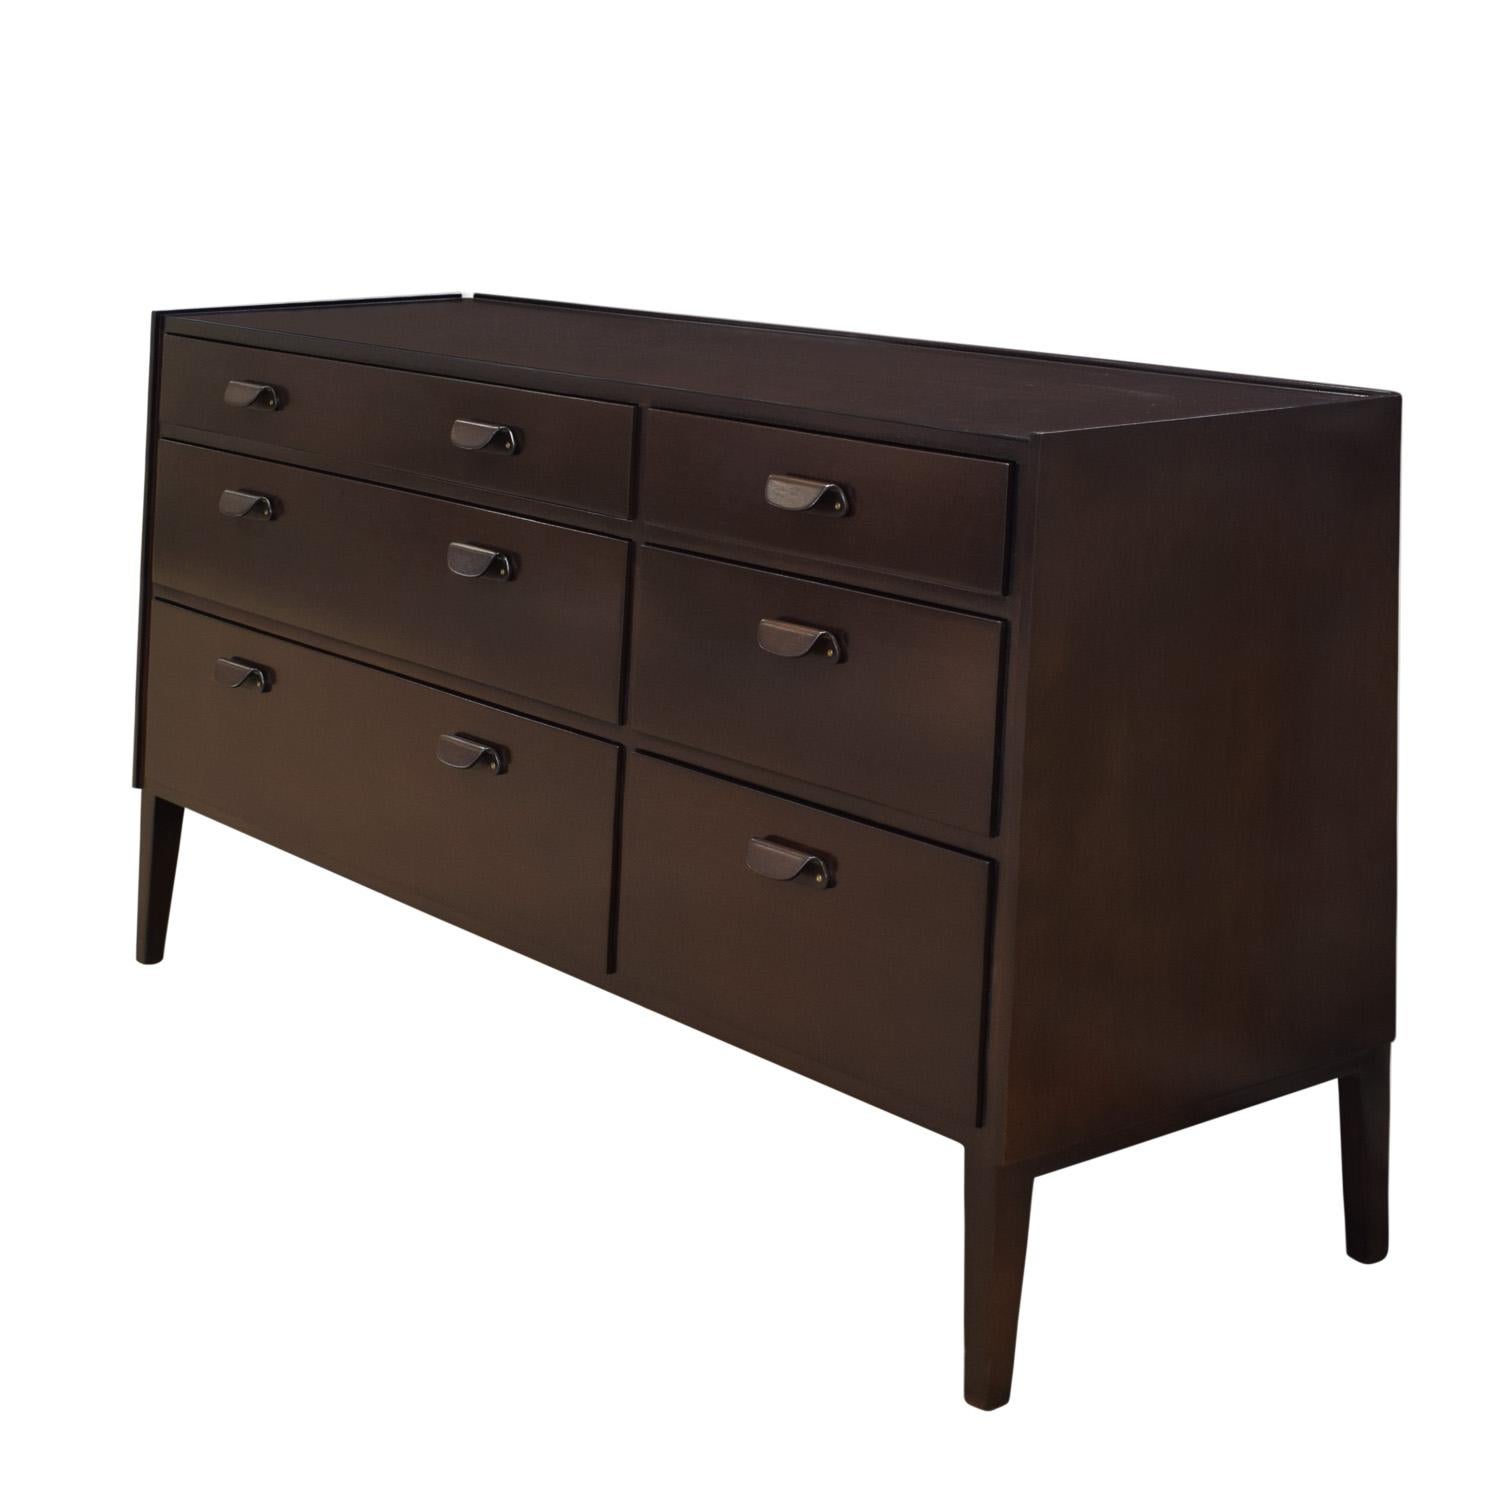 Elegant chest of drawers model 5562 in dark mahogany designed with a gently slanted front with 9 drawers, each with a hand-carved pull, by Edward Wormley for Dunbar, American 1955 (signed “Dunbar Berne Indiana” on metal label in top left drawer.)